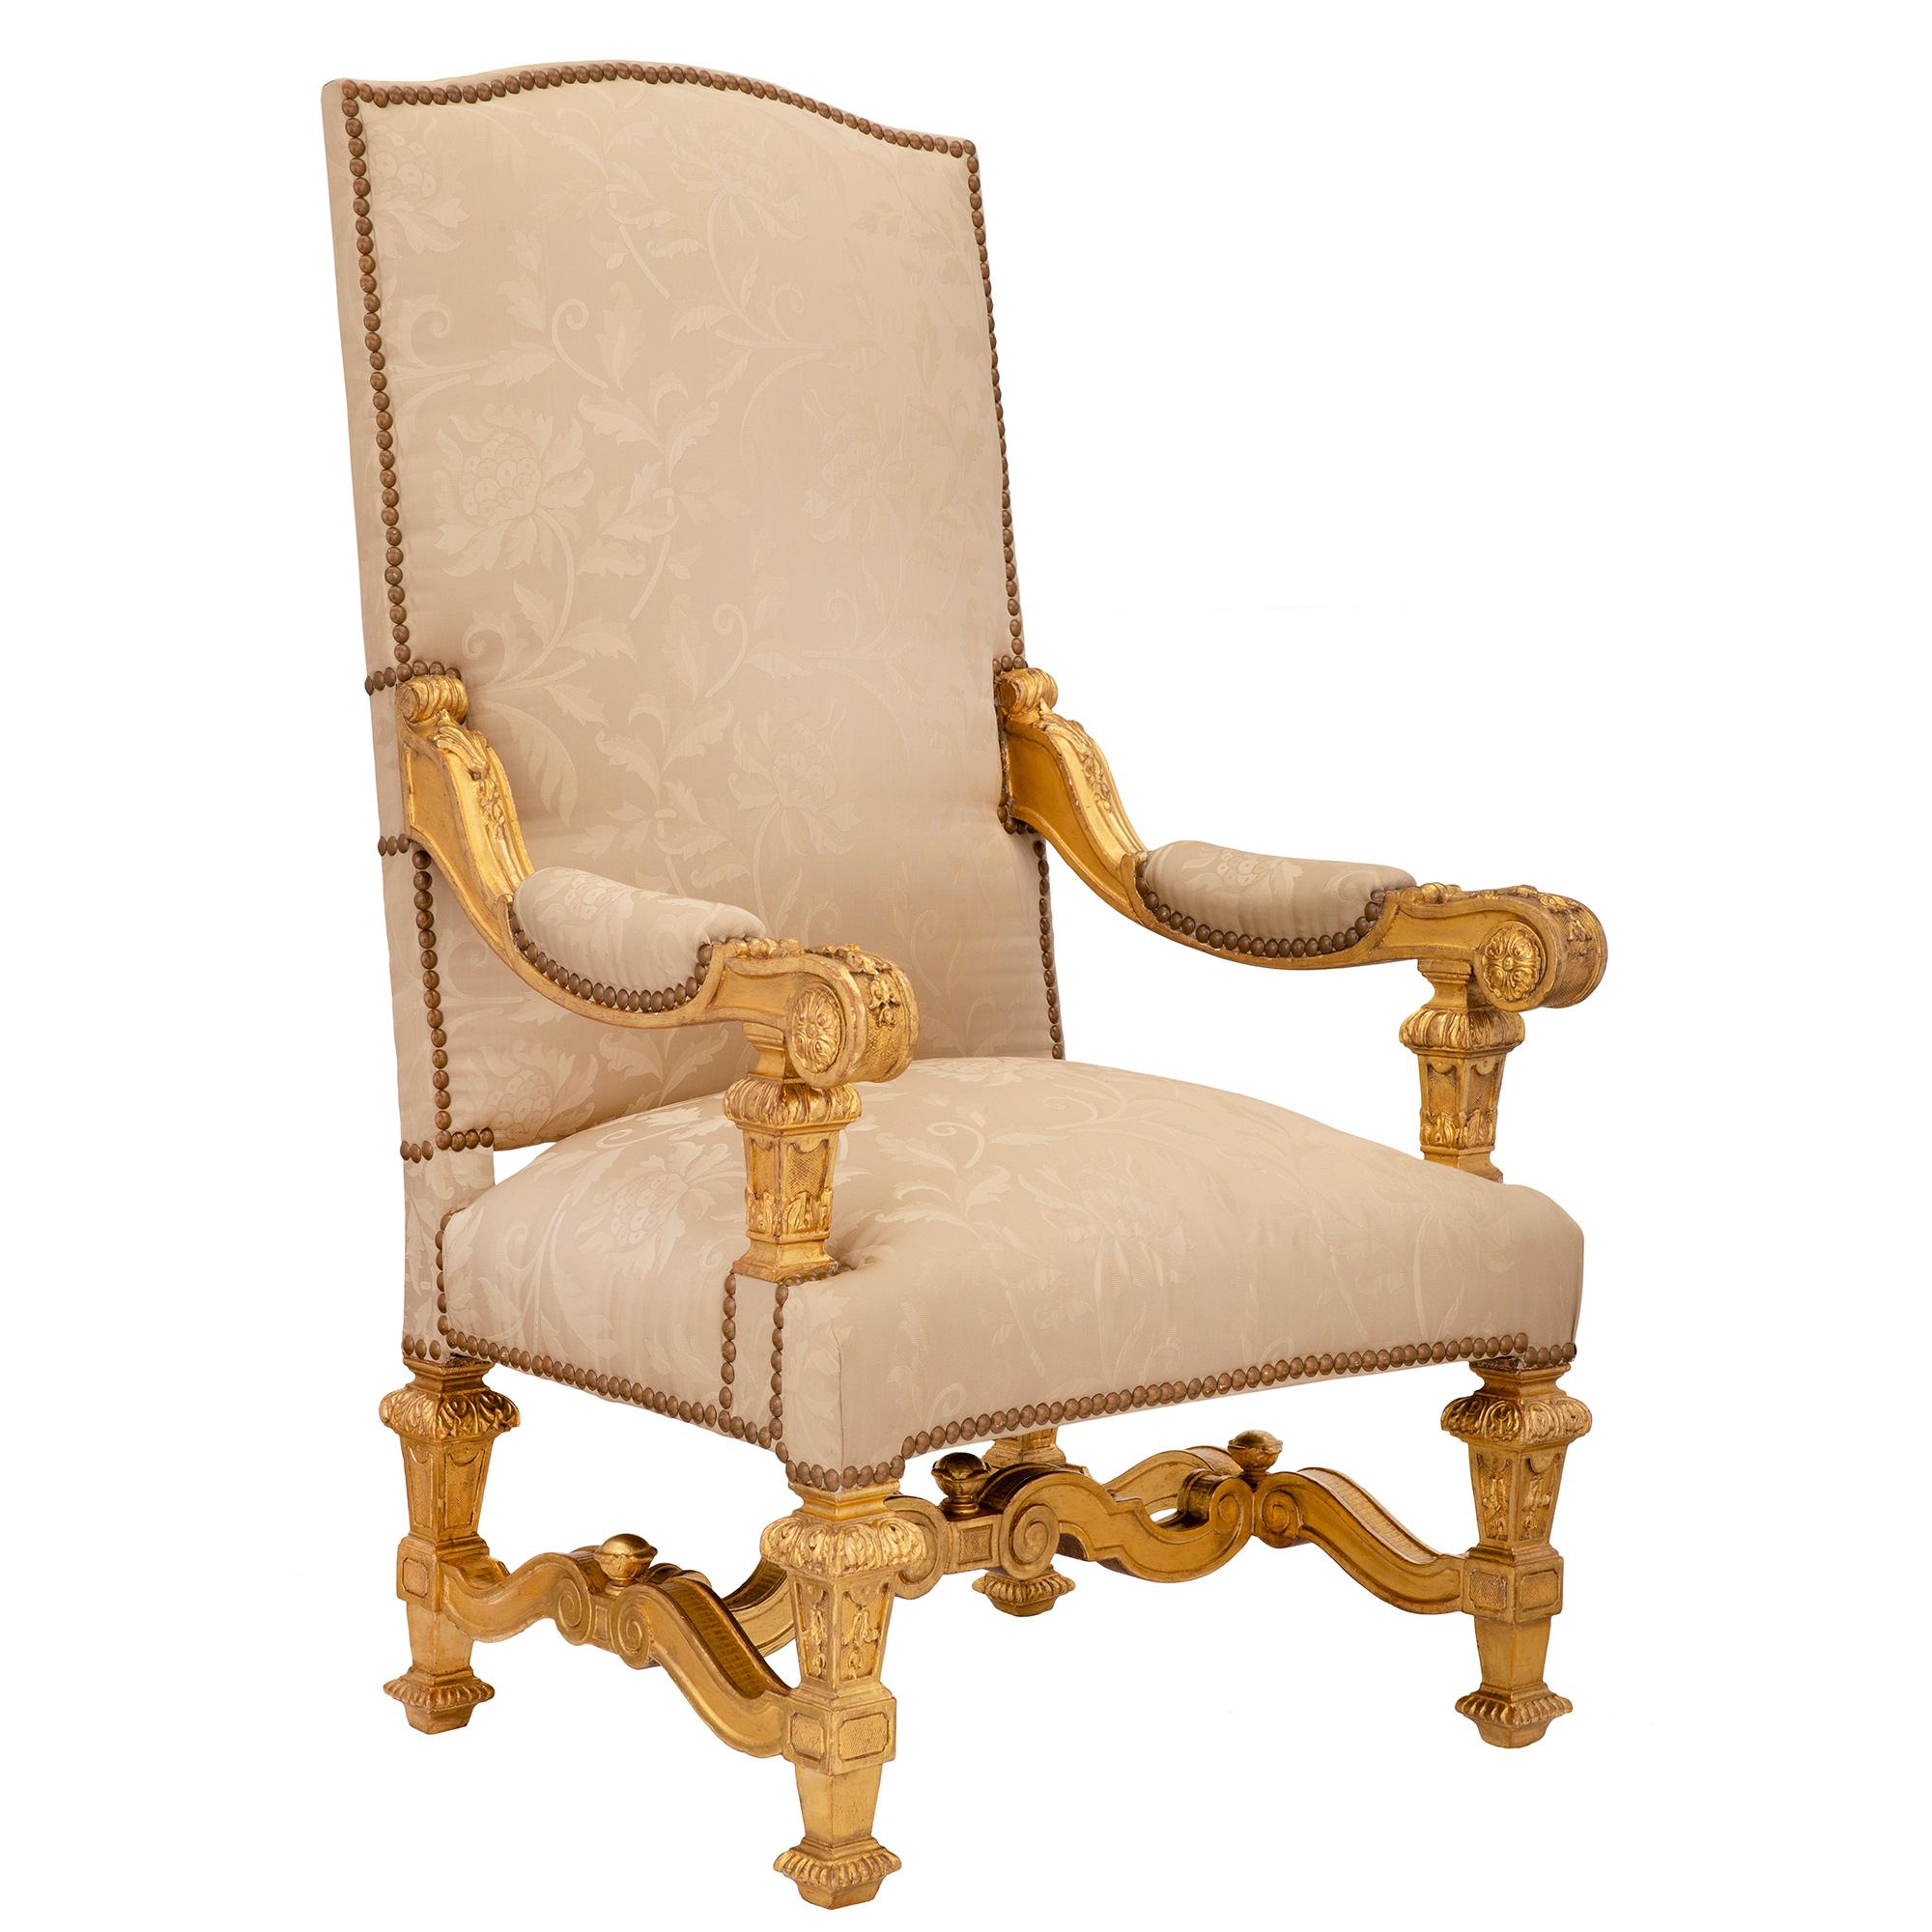 A most impressive pair of Italian mid-19th century Louis XIV st. giltwood armchairs. Each armchair is raised by handsome square tapered legs with fine reeded block feet and rich foliate designs. Each leg is connected by an elegant scrolled